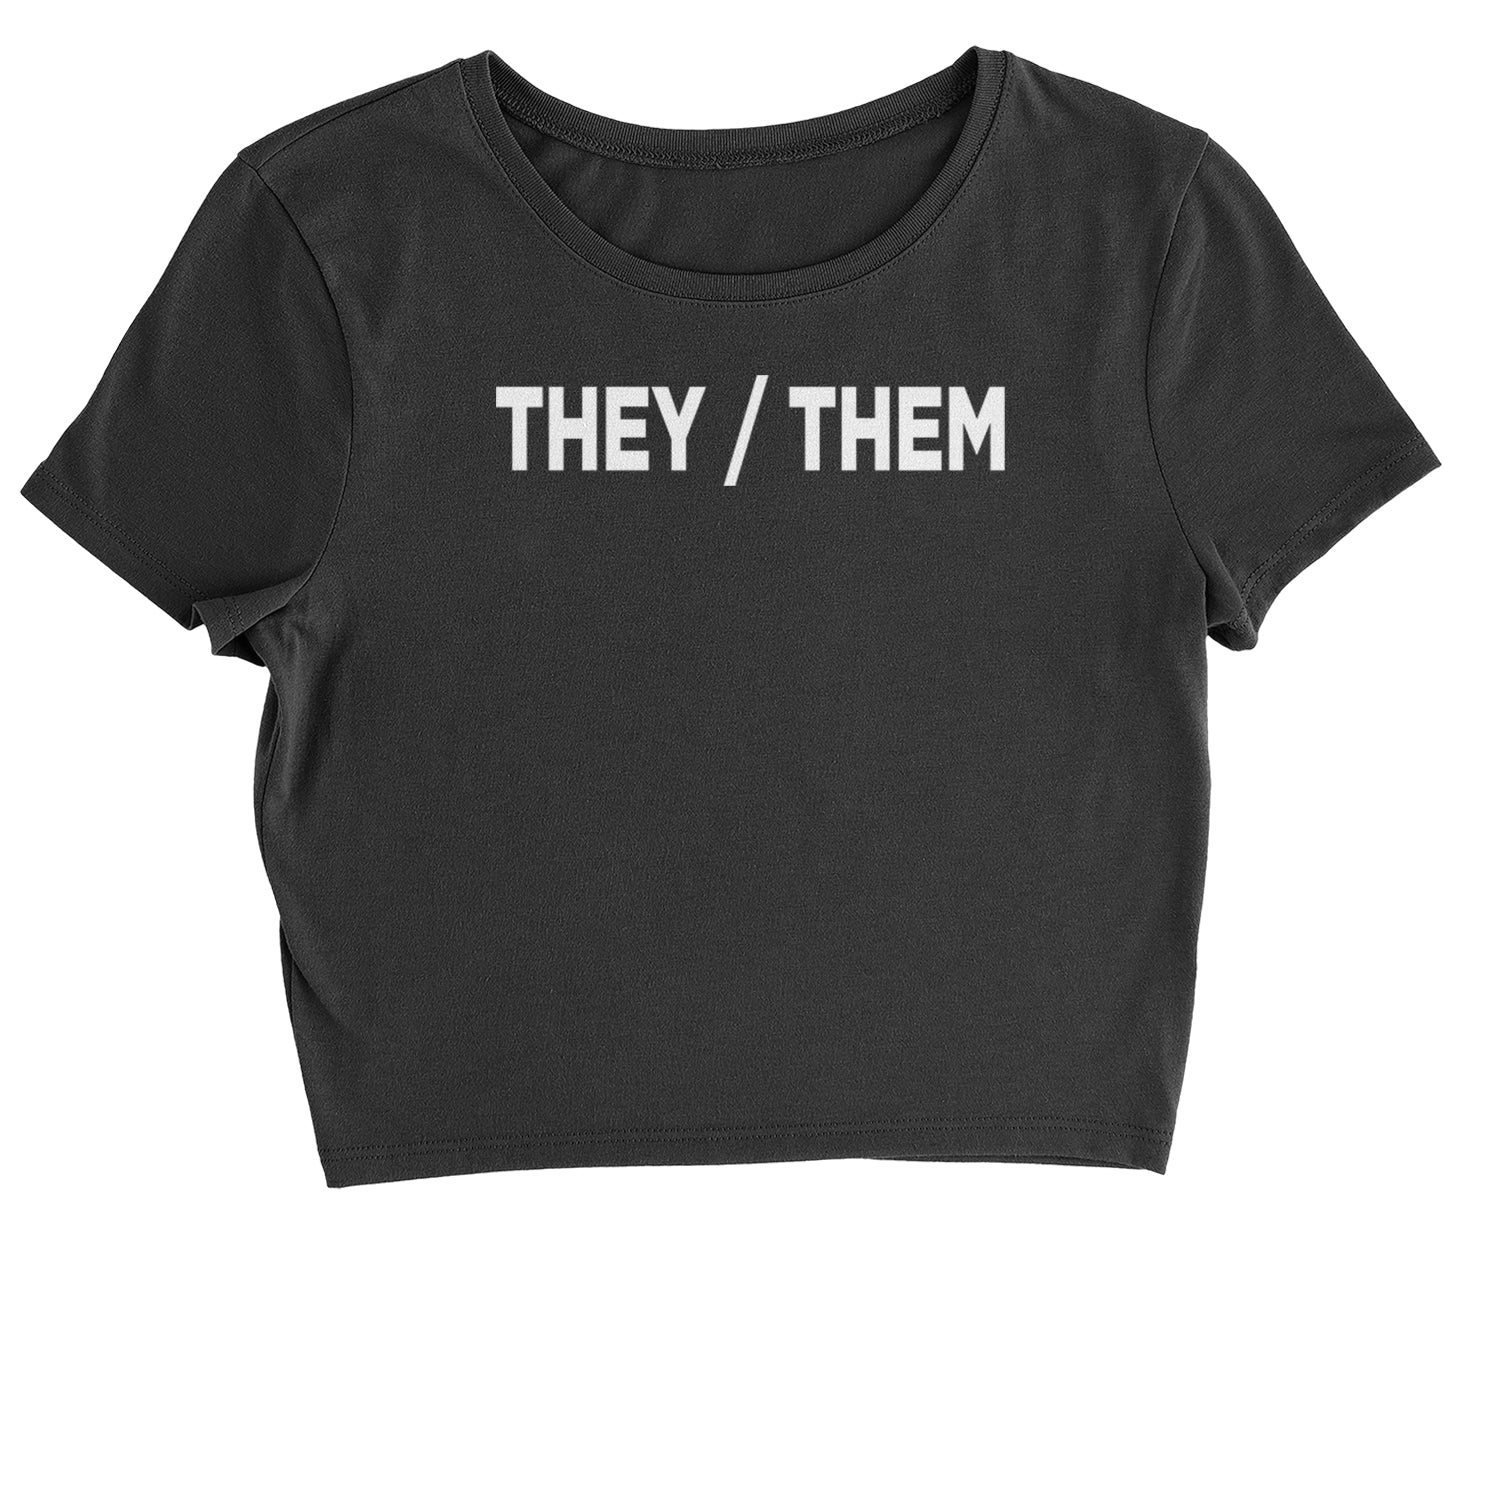 They Them Gender Pronouns Diversity and Inclusion Cropped T-Shirt binary, civil, gay, he, her, him, nonbinary, pride, rights, she, them, they by Expression Tees